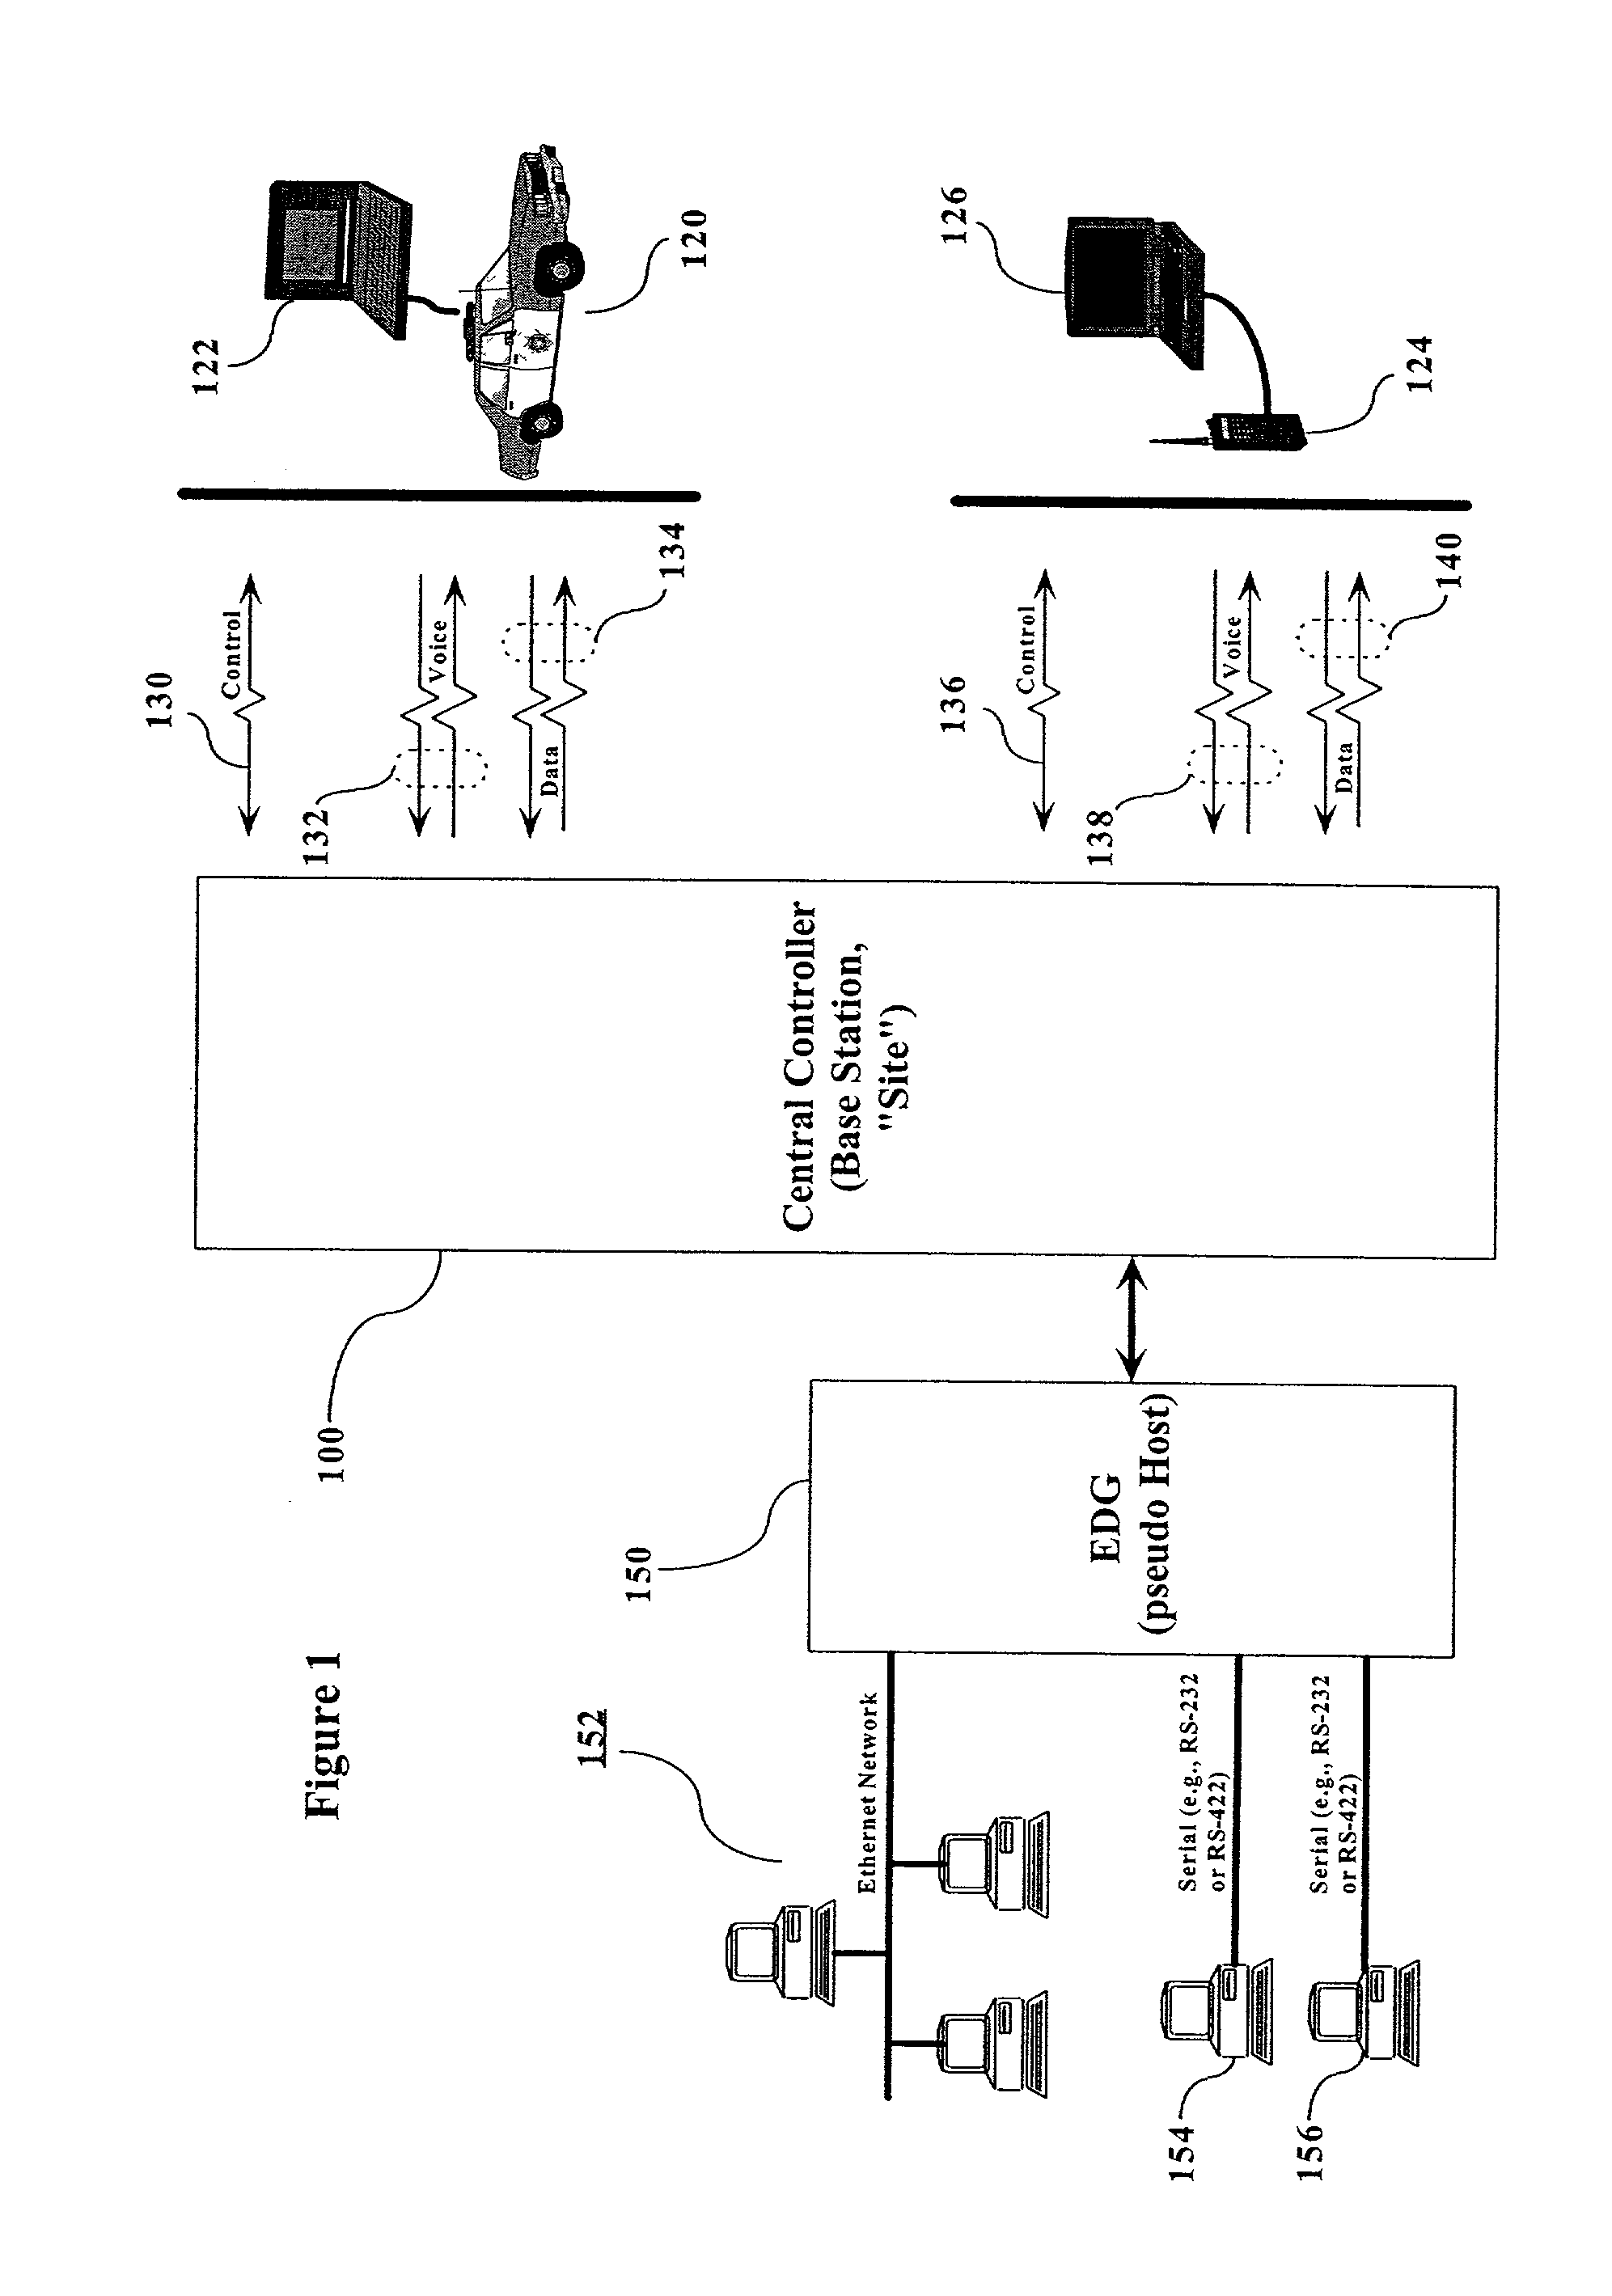 Data interface protocol for two-way radio communication systems